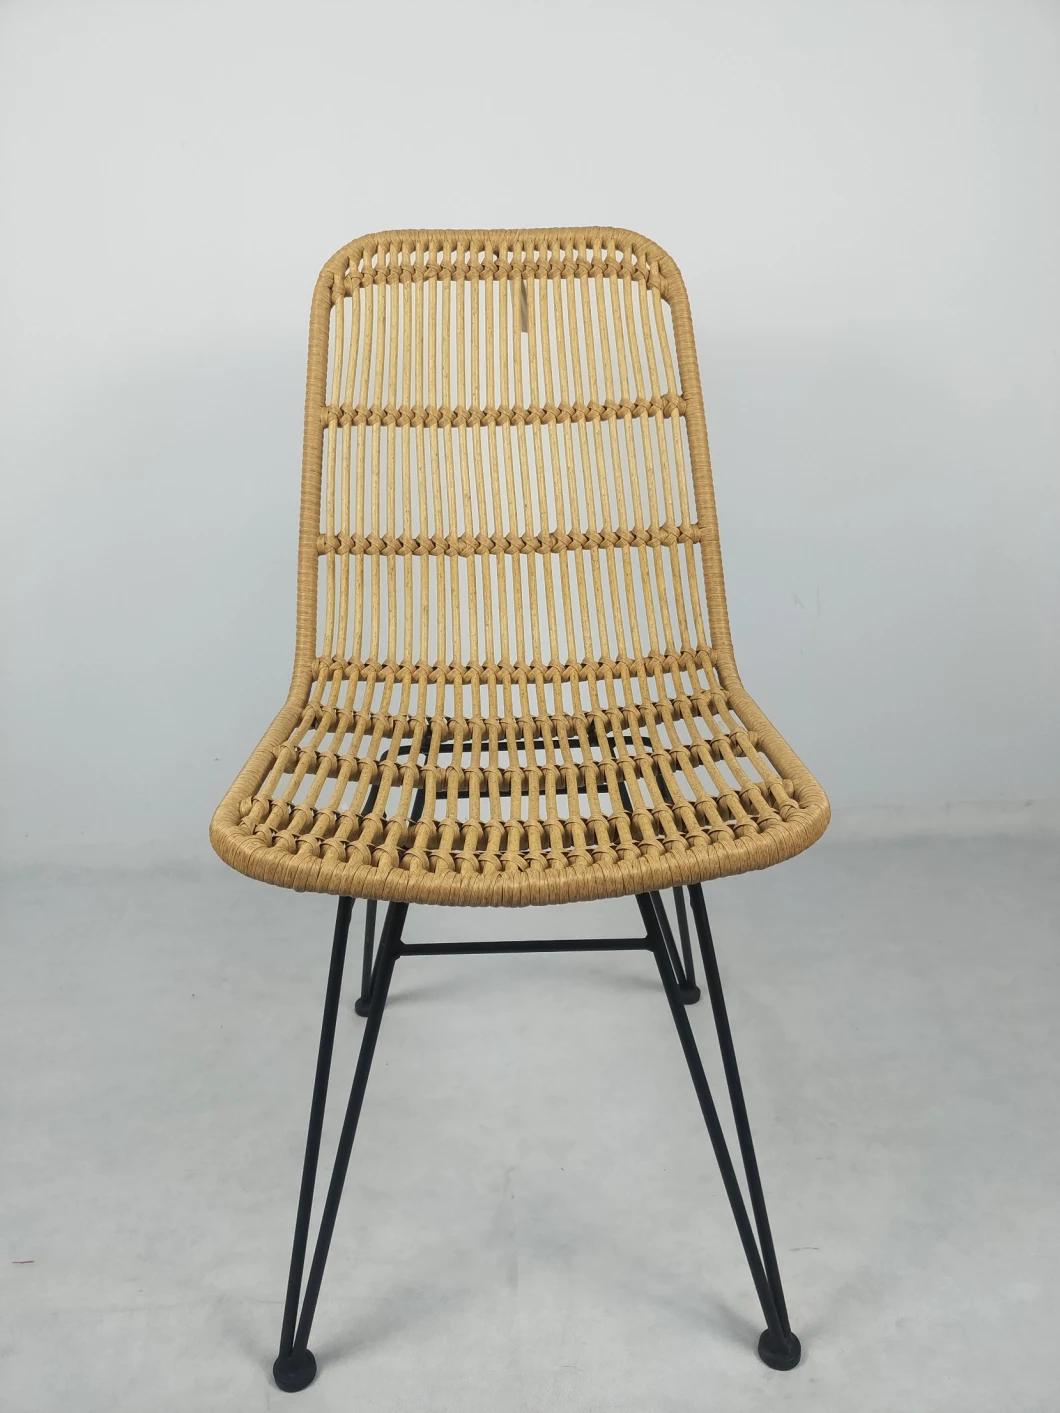 New Products Handsome Non-Wood Aluminum Outdoor Furniture PE Rattan Chairs